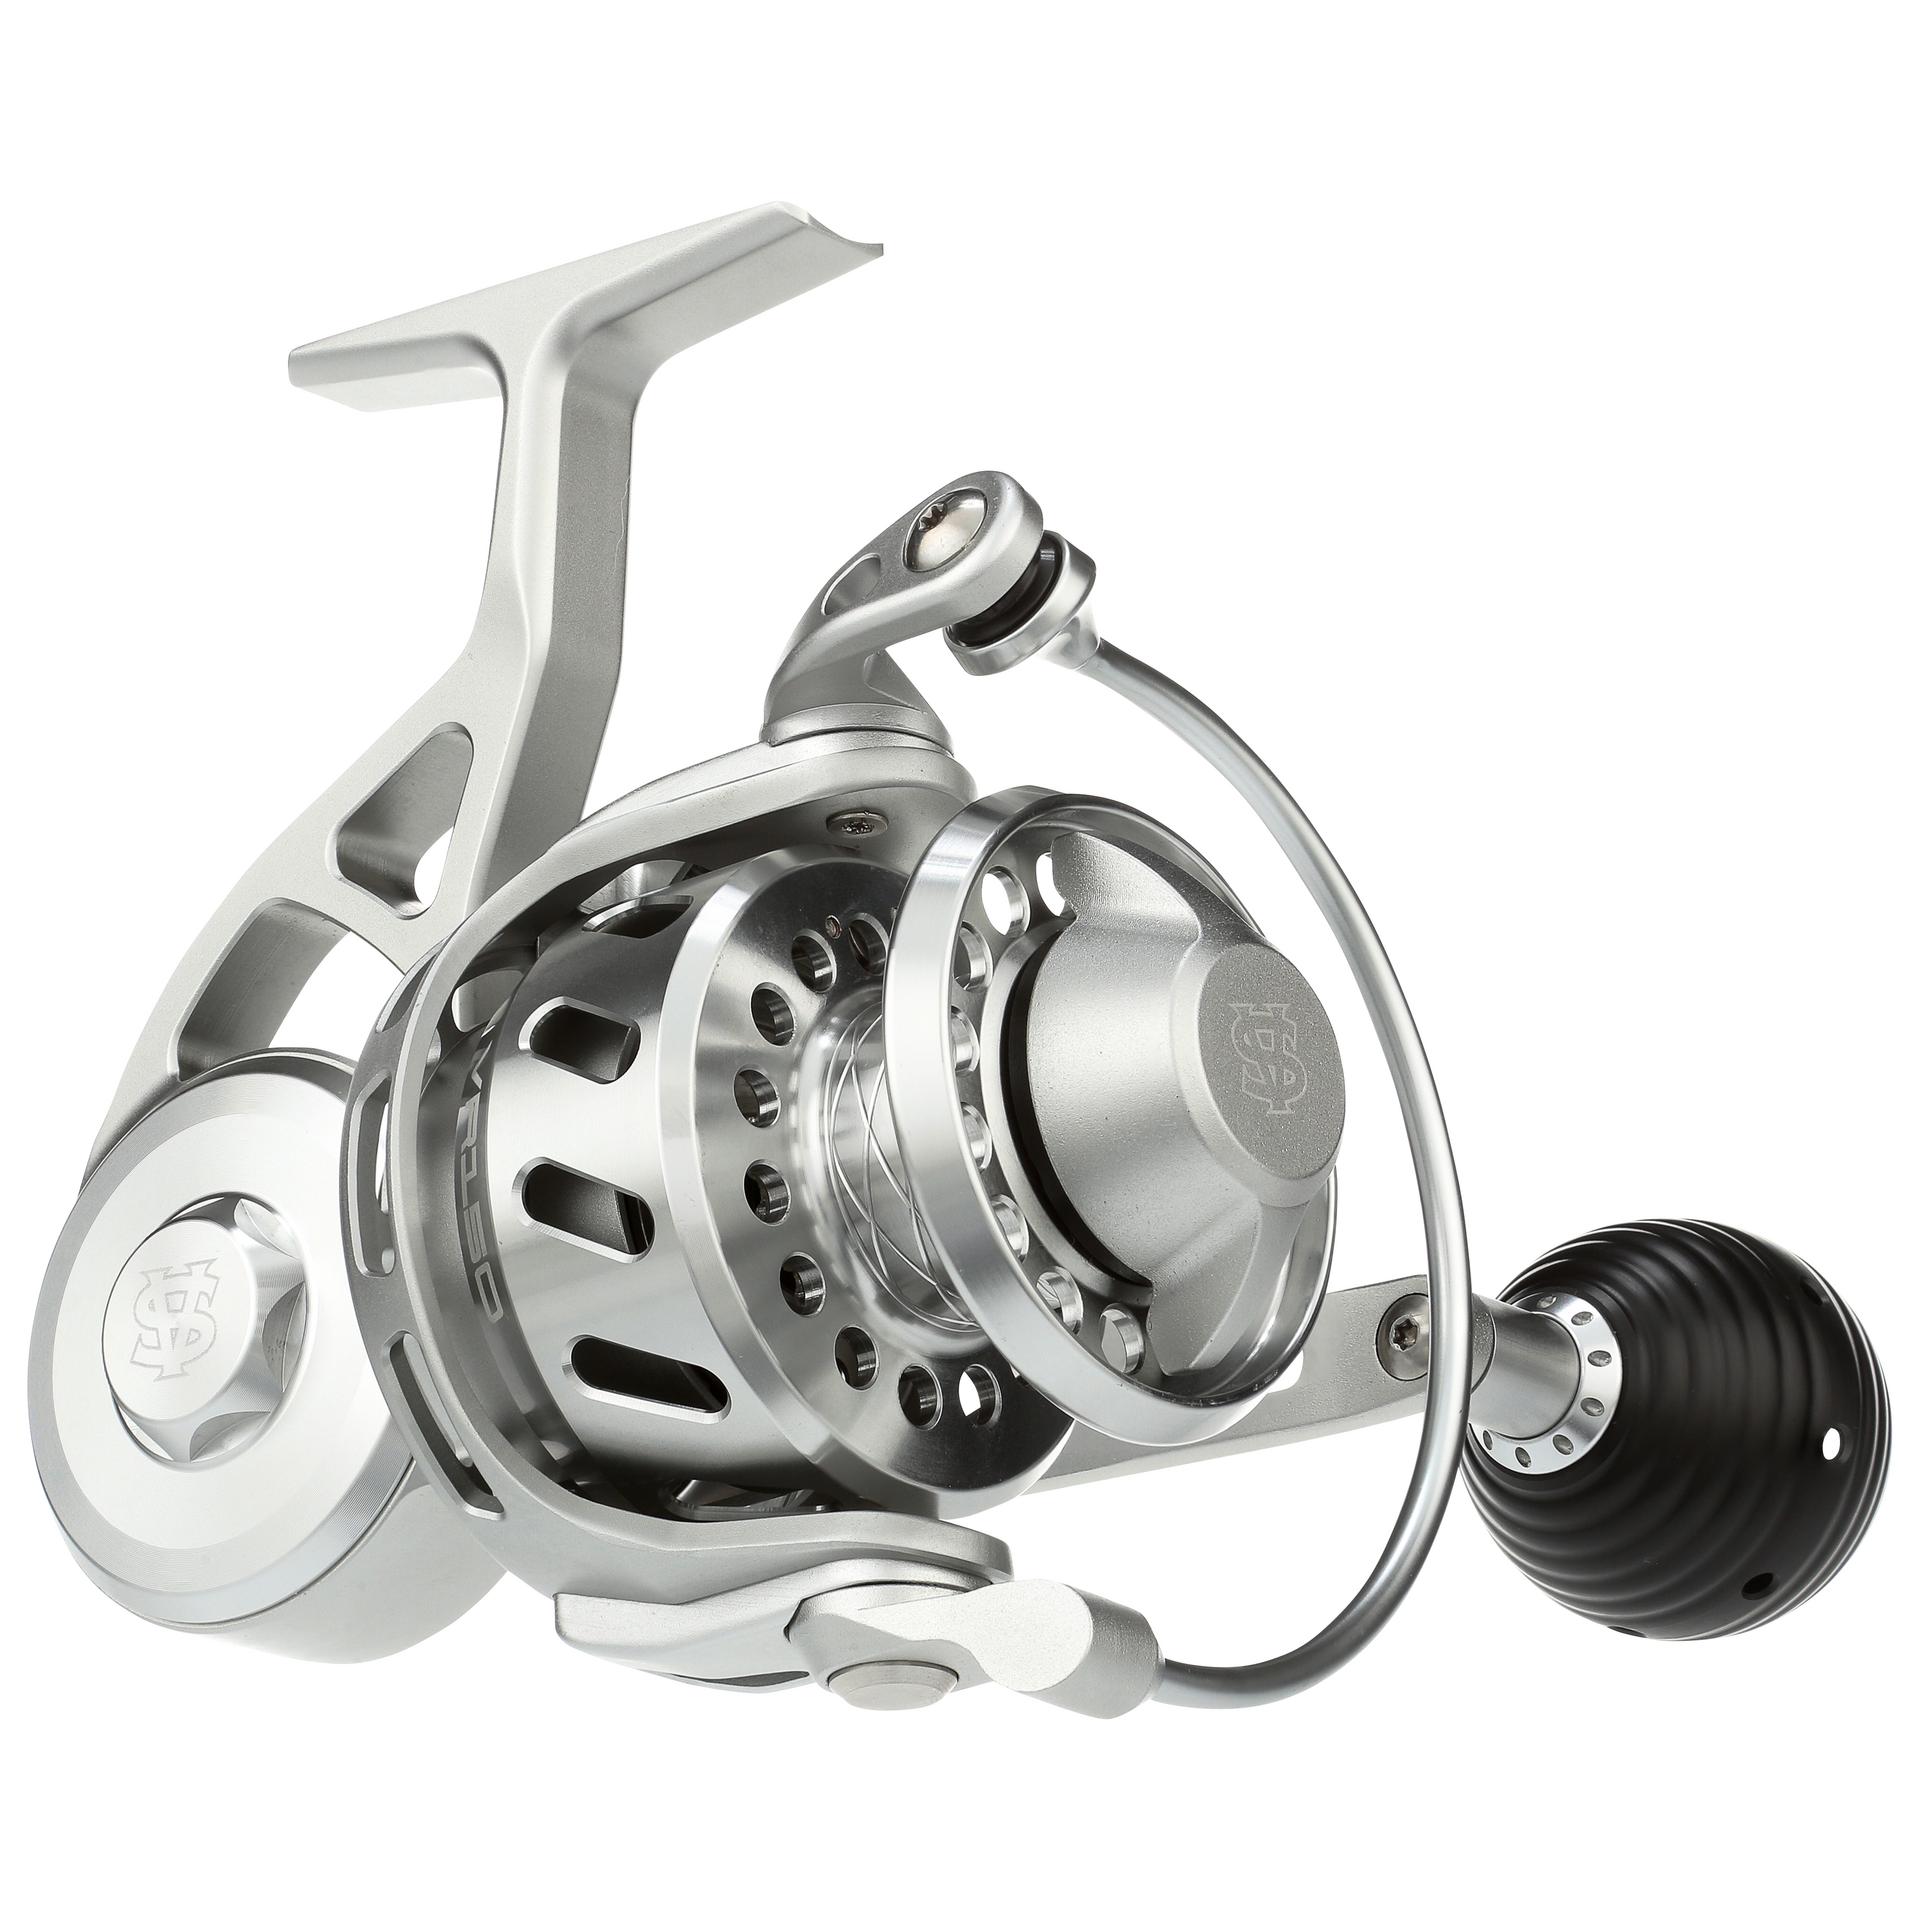 Van Staal VR75 Spinning Reels with a FREE Dark Matter Bonefish Travel  Spinning Rod is back in stock. Get yours before they sell out!